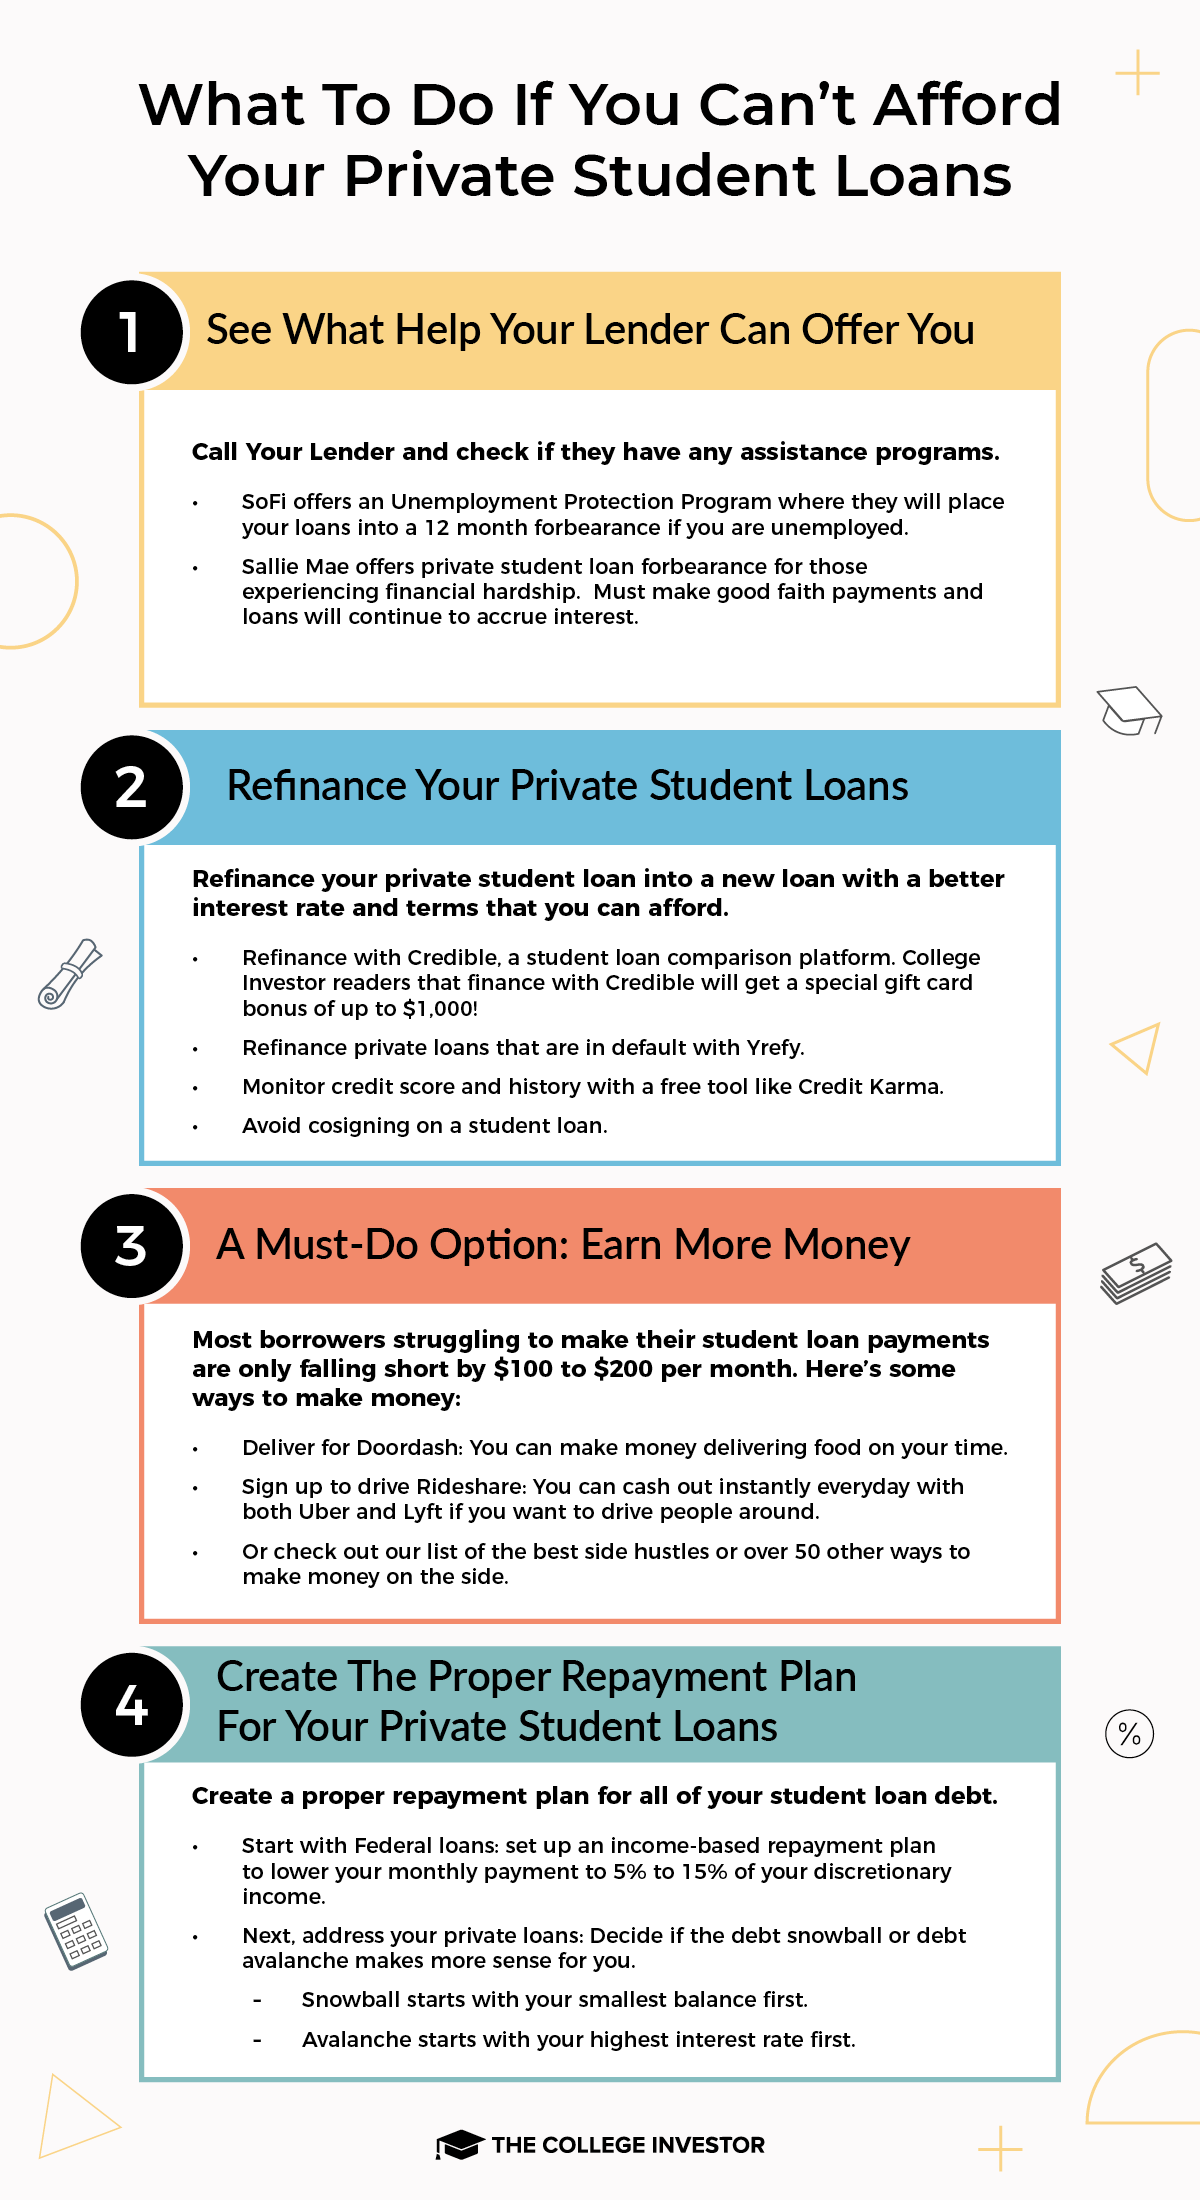 Options If You Can't Afford Your Private Student Loans Infographic